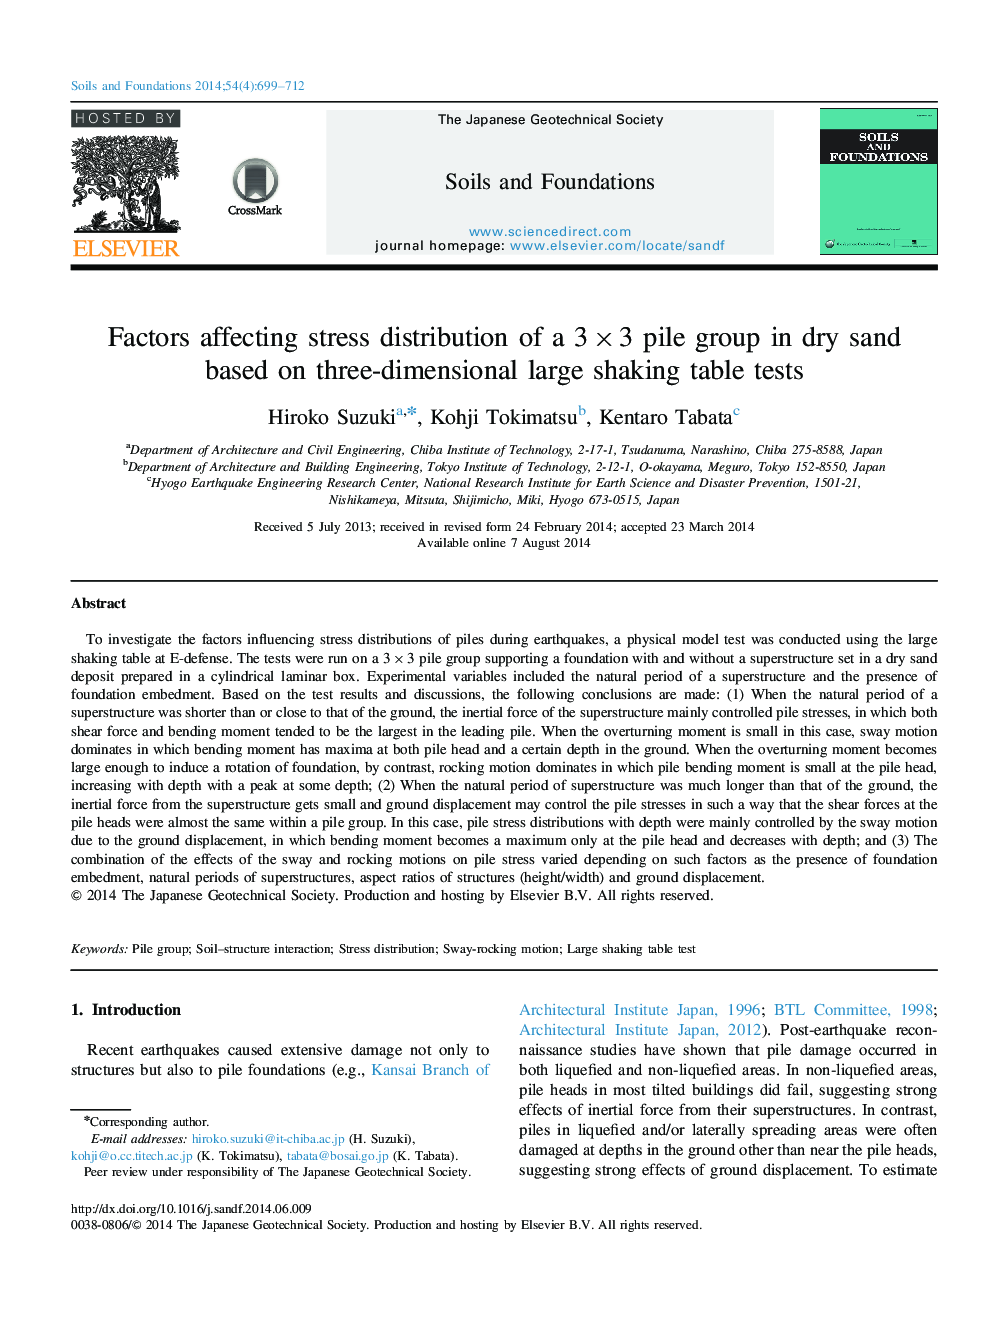 Factors affecting stress distribution of a 3×3 pile group in dry sand based on three-dimensional large shaking table tests 